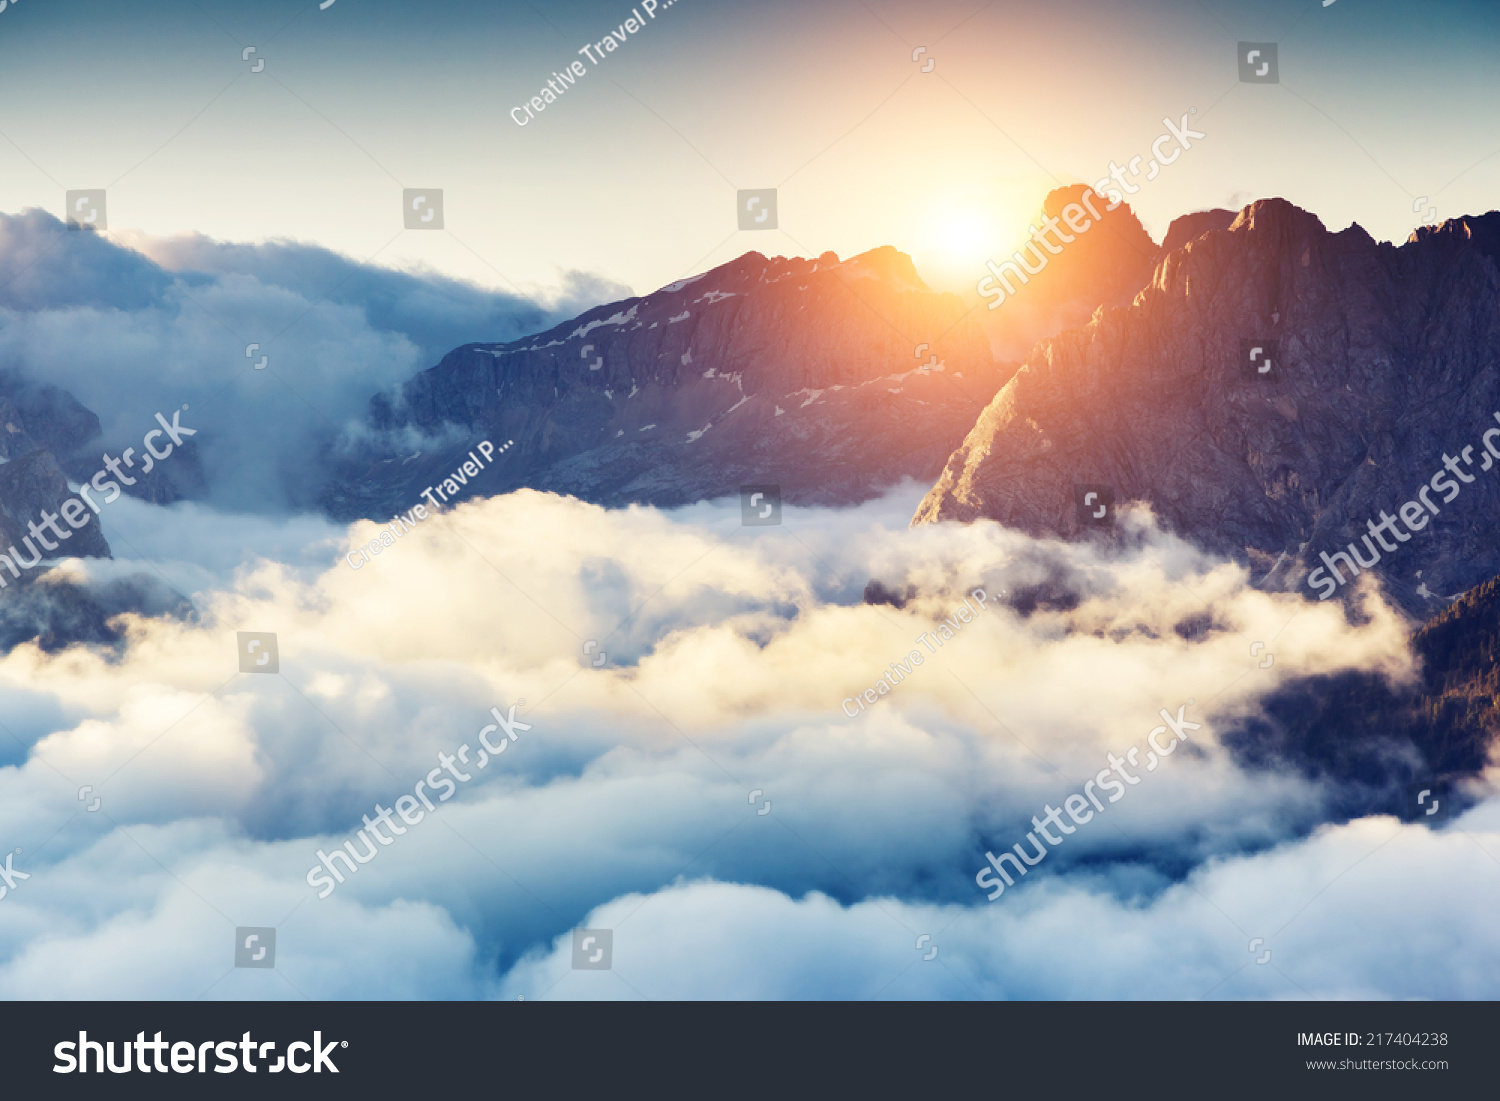 Great view of the foggy Val di Fassa valley with passo Sella. National Park. Dolomites, South Tyrol. Location Canazei, Campitello, Mazzin. Italy, Europe. Dramatic scene. Beauty world. #217404238